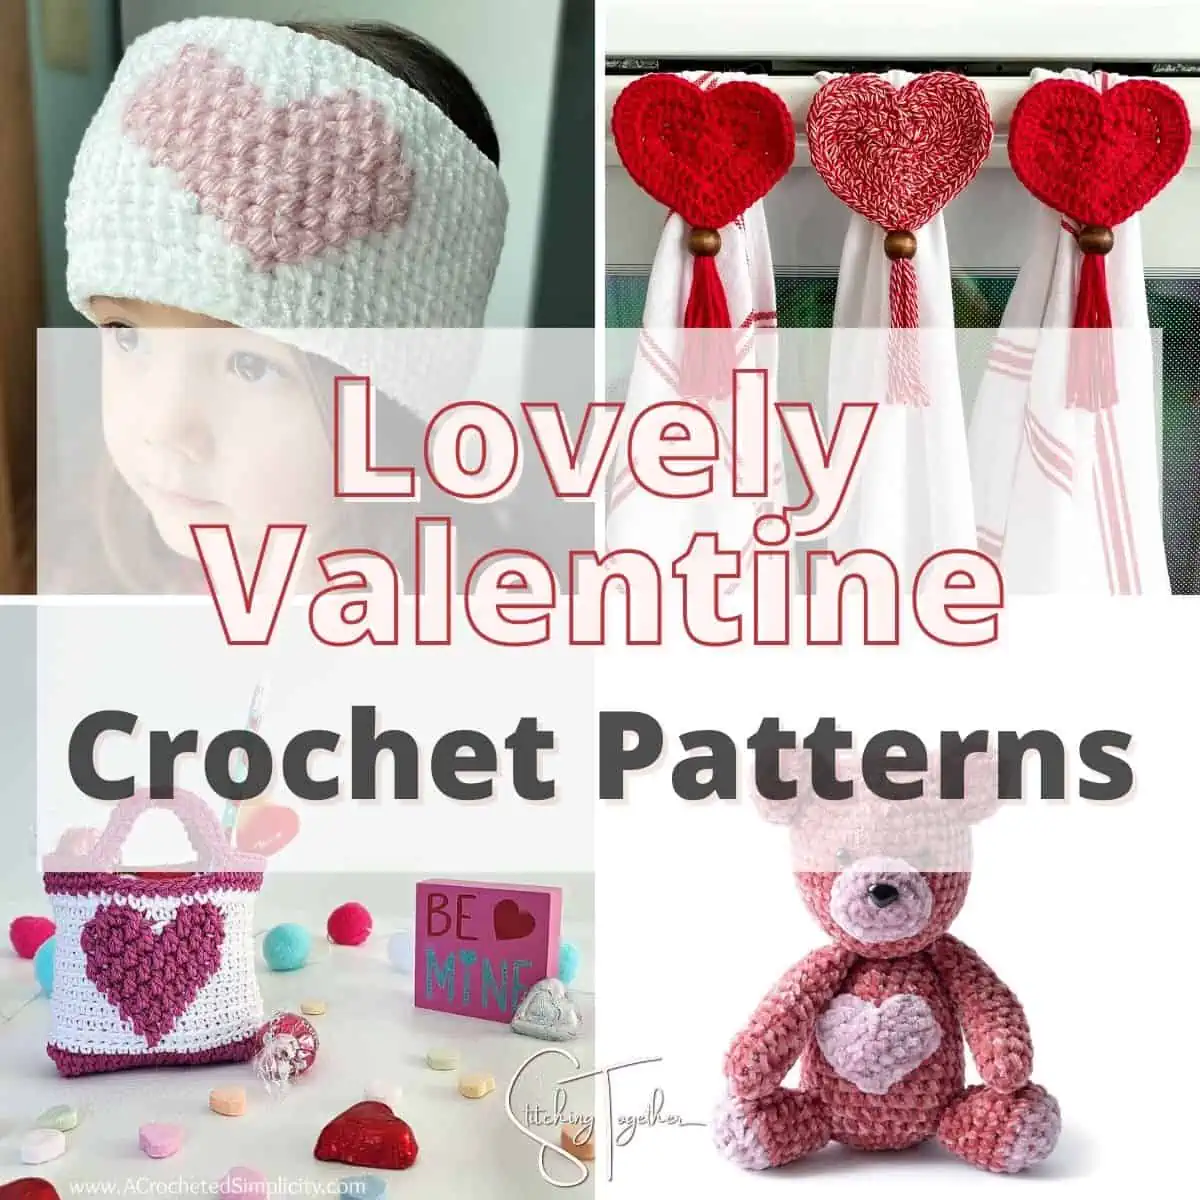 40+ Valentine Crochet Patterns – Gorgeous and Free